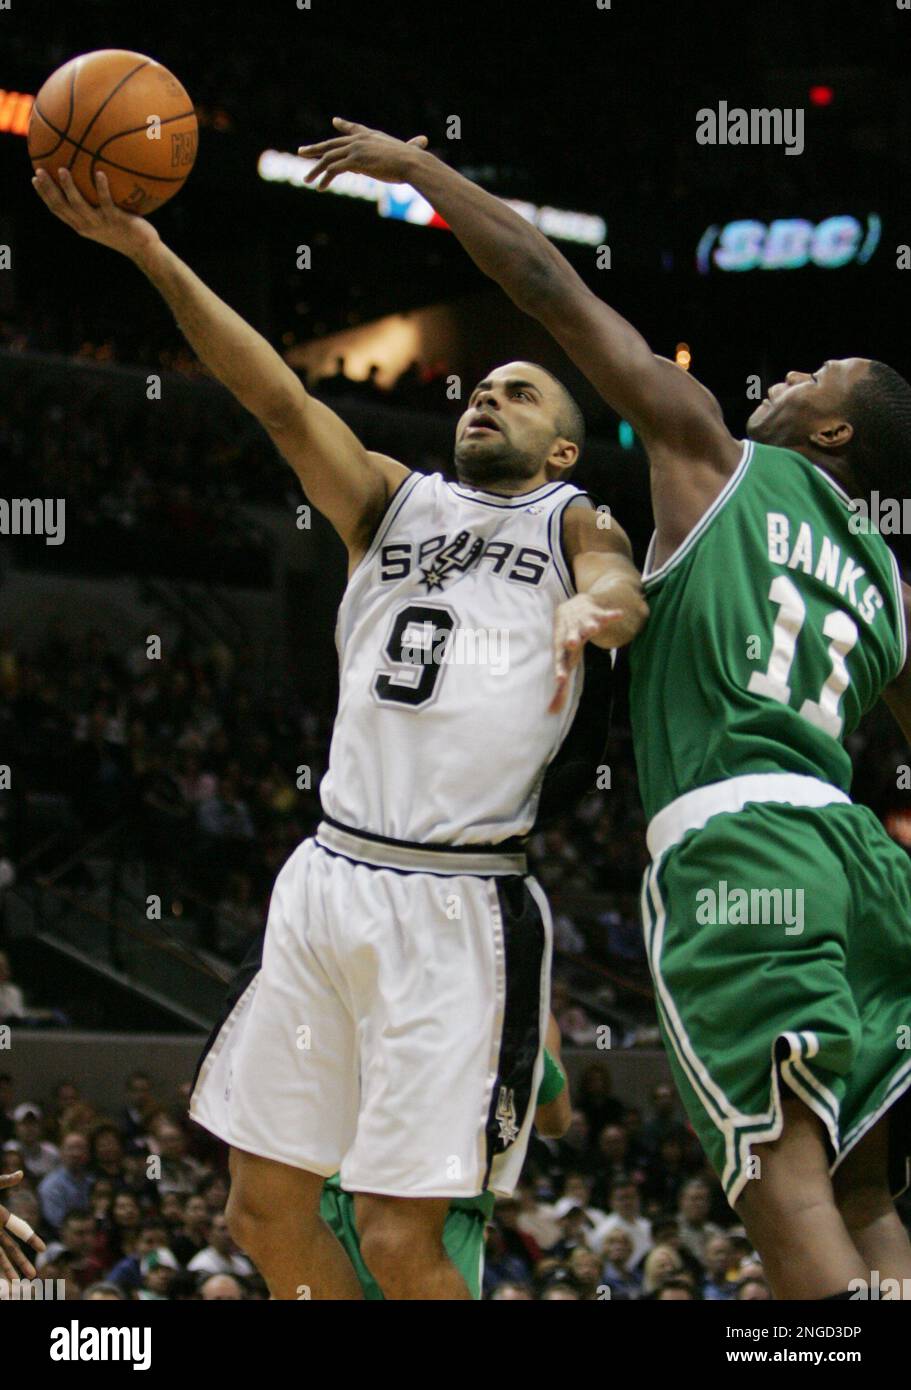 San Antonio Spurs guard Tony Parker (9) of France drives to the basket as  Boston Celtics guard Marcus Banks defends during the first quarter in San  Antonio Sunday, Dec. 26, 2004. (AP